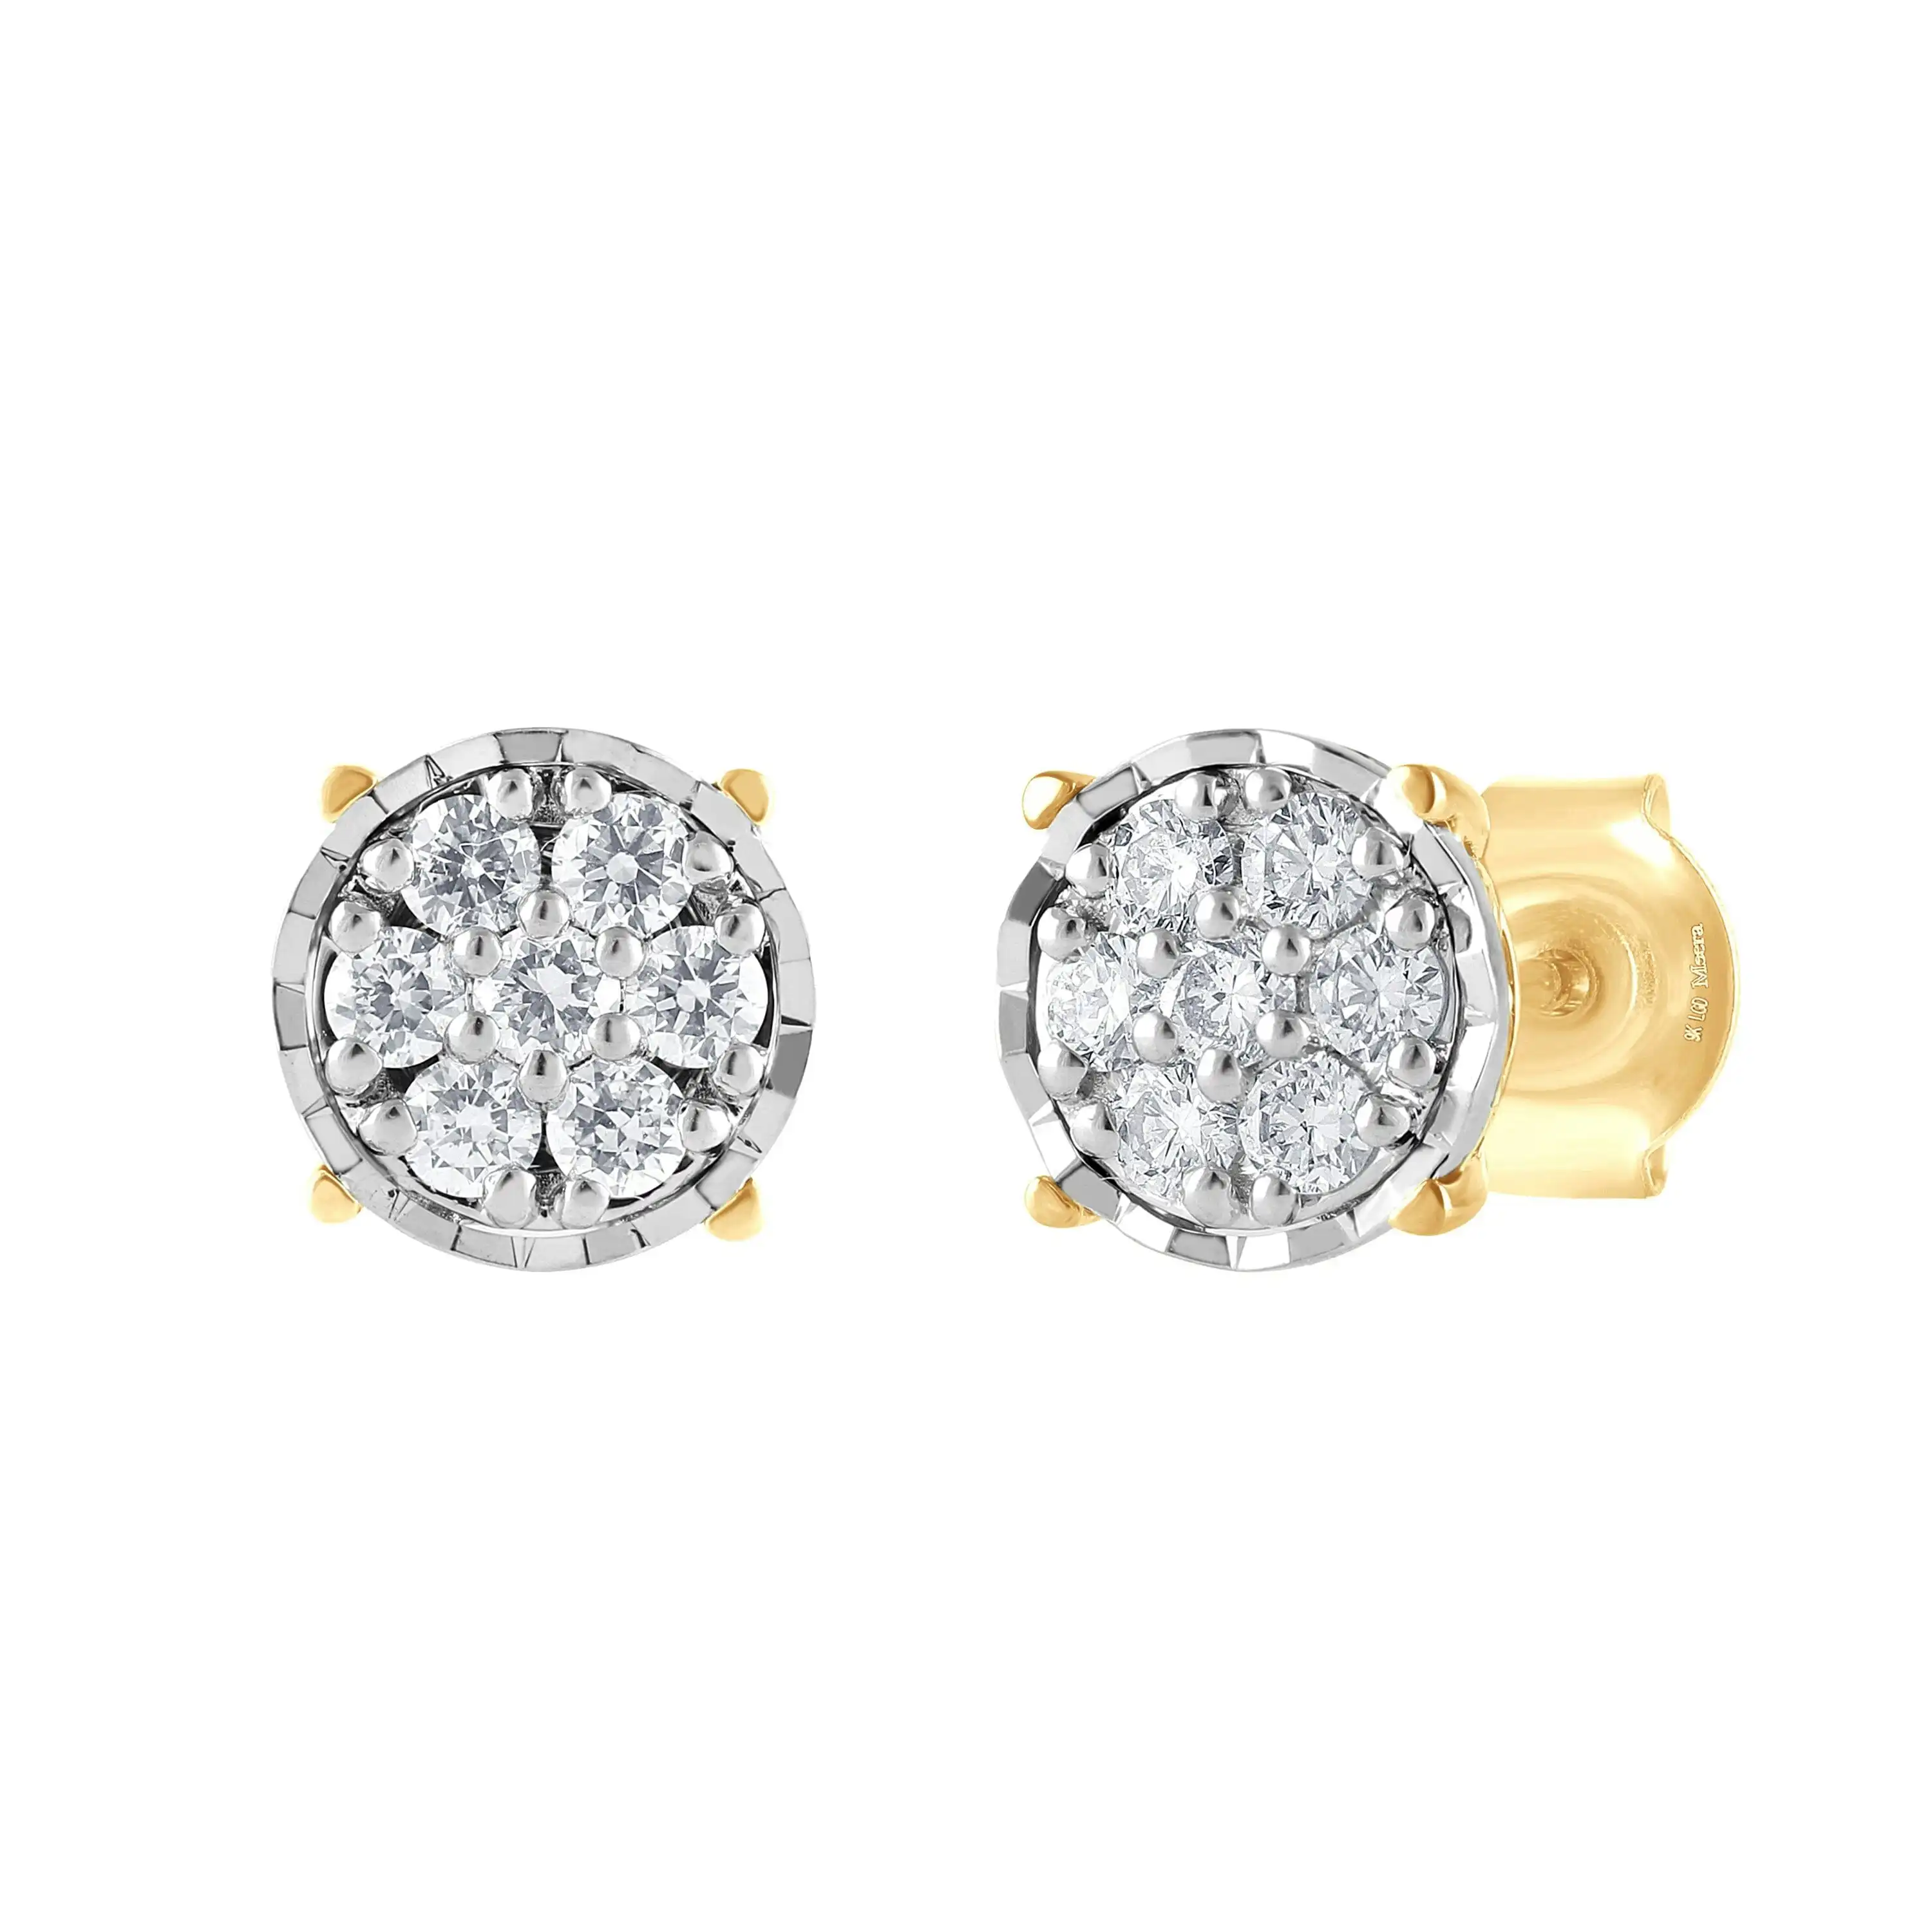 Meera Flower Composite Earrings with 1/3ct of Laboratory Grown Diamonds in 9ct Yellow Gold